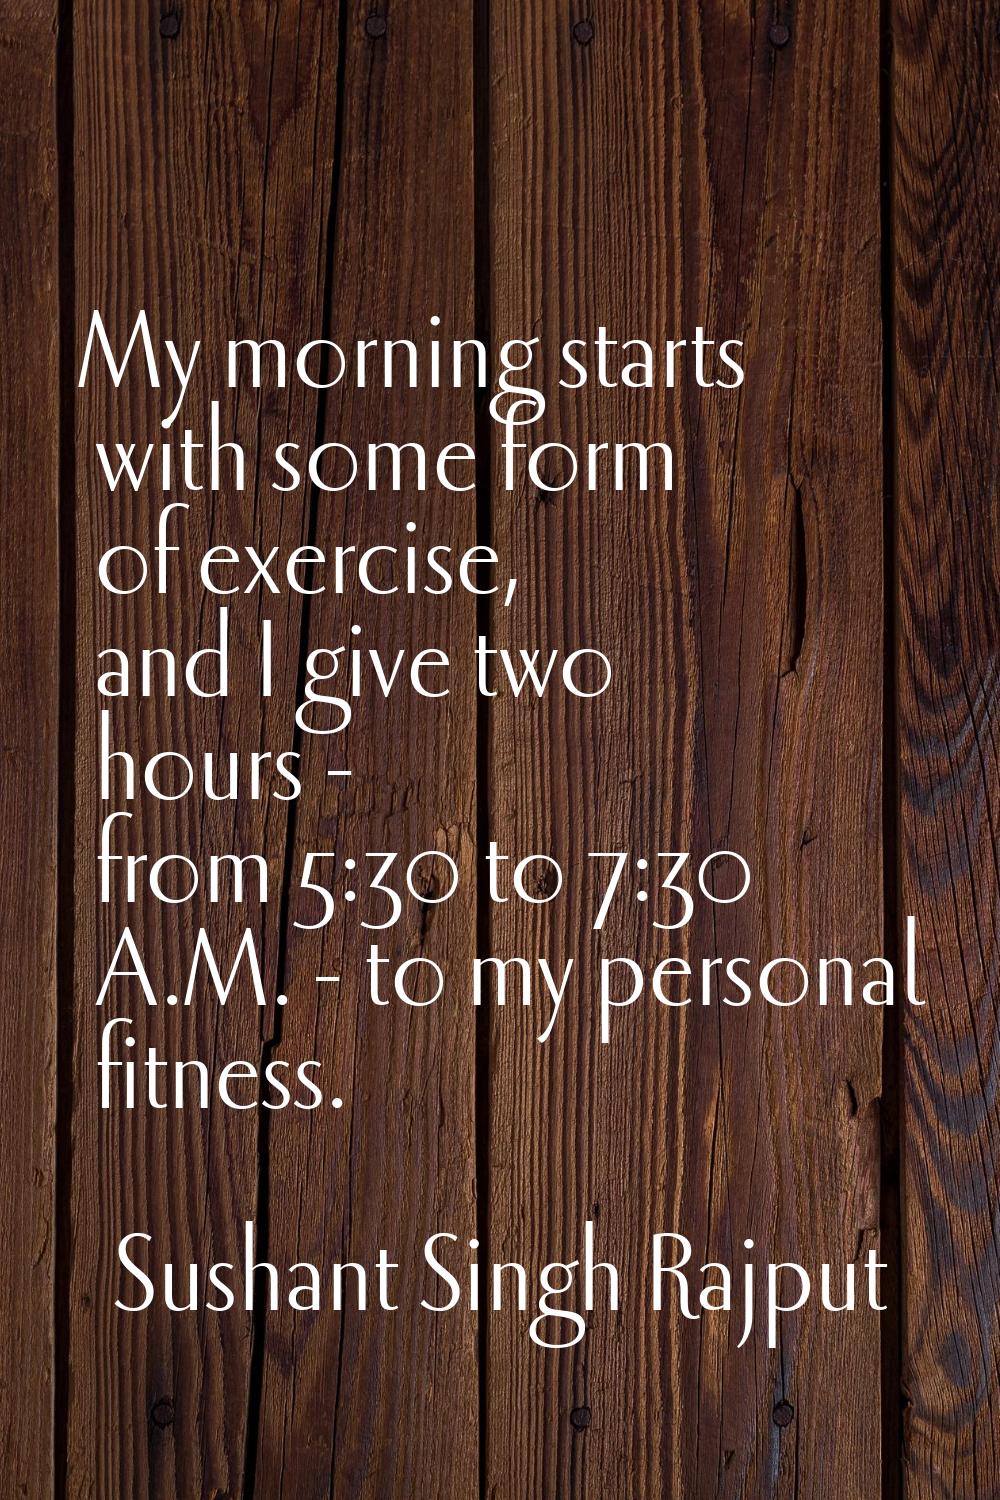 My morning starts with some form of exercise, and I give two hours - from 5:30 to 7:30 A.M. - to my